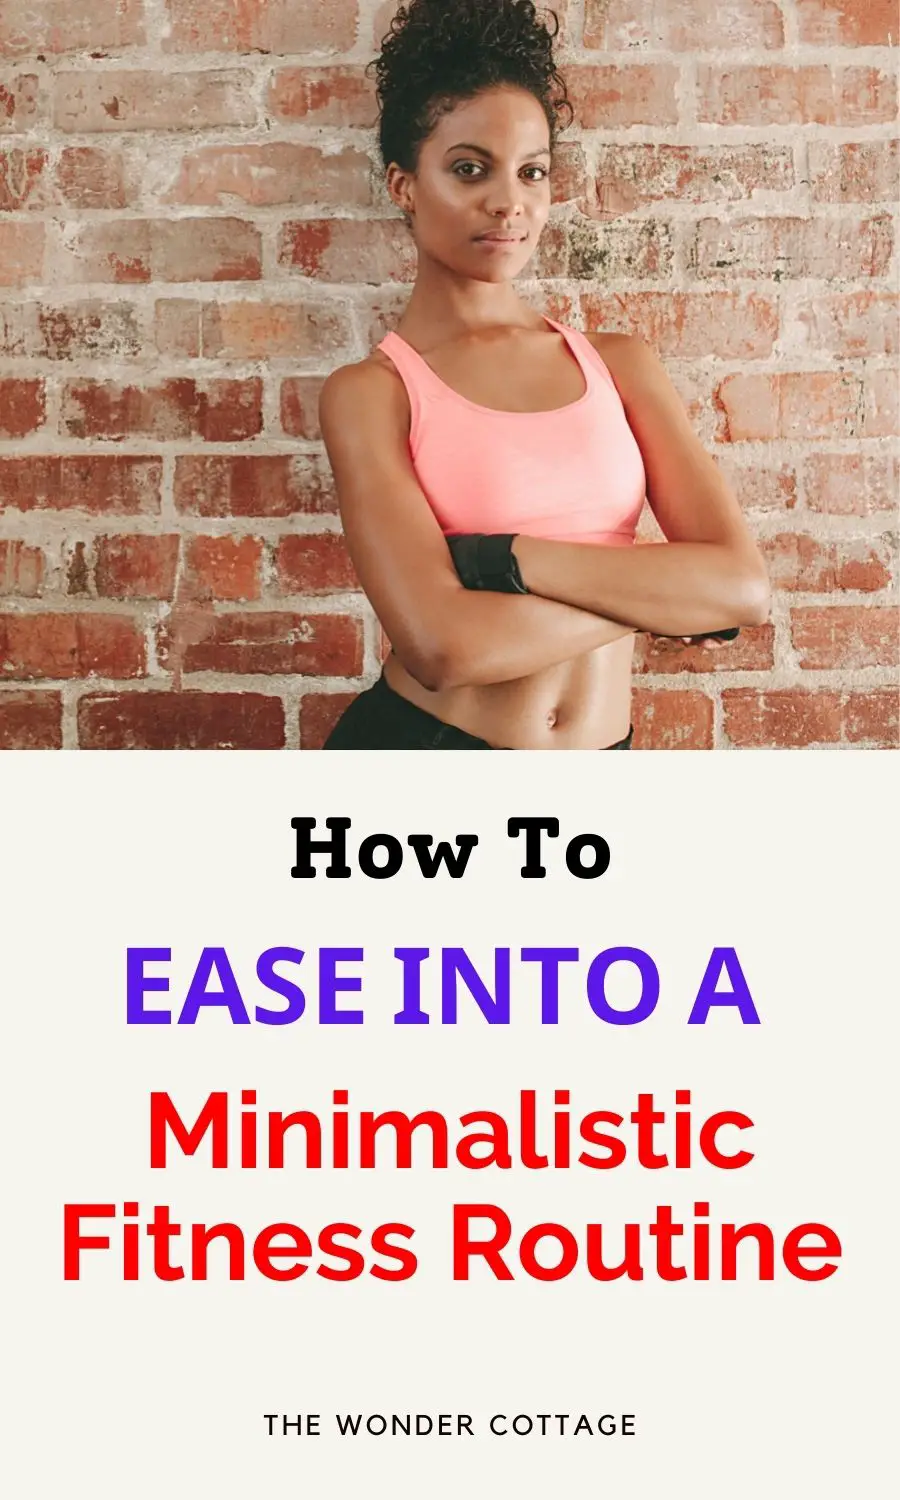 How To Ease Into A Minimalistic Fitness Routine